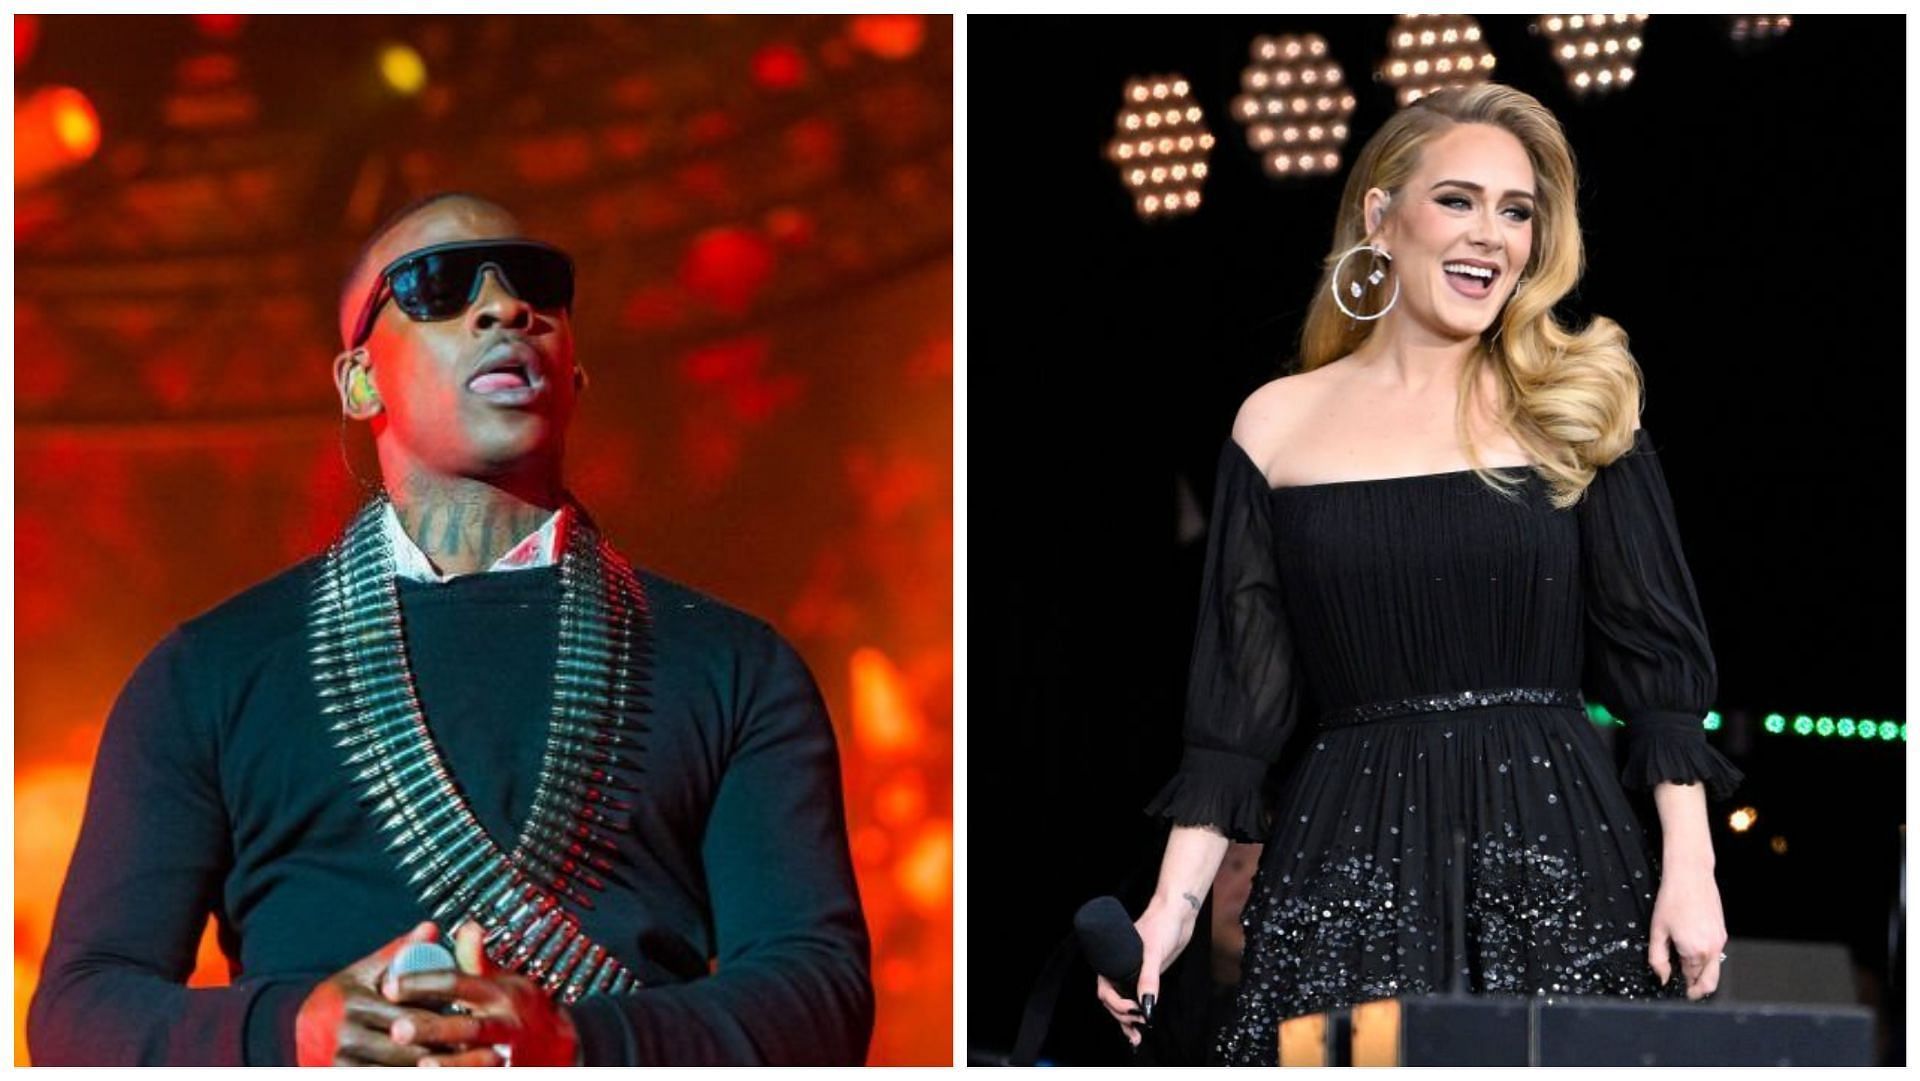 Skepta and Adele sparked dating rumours (Images via Joseph Okpako and Gareth Cattermole/Getty Images)